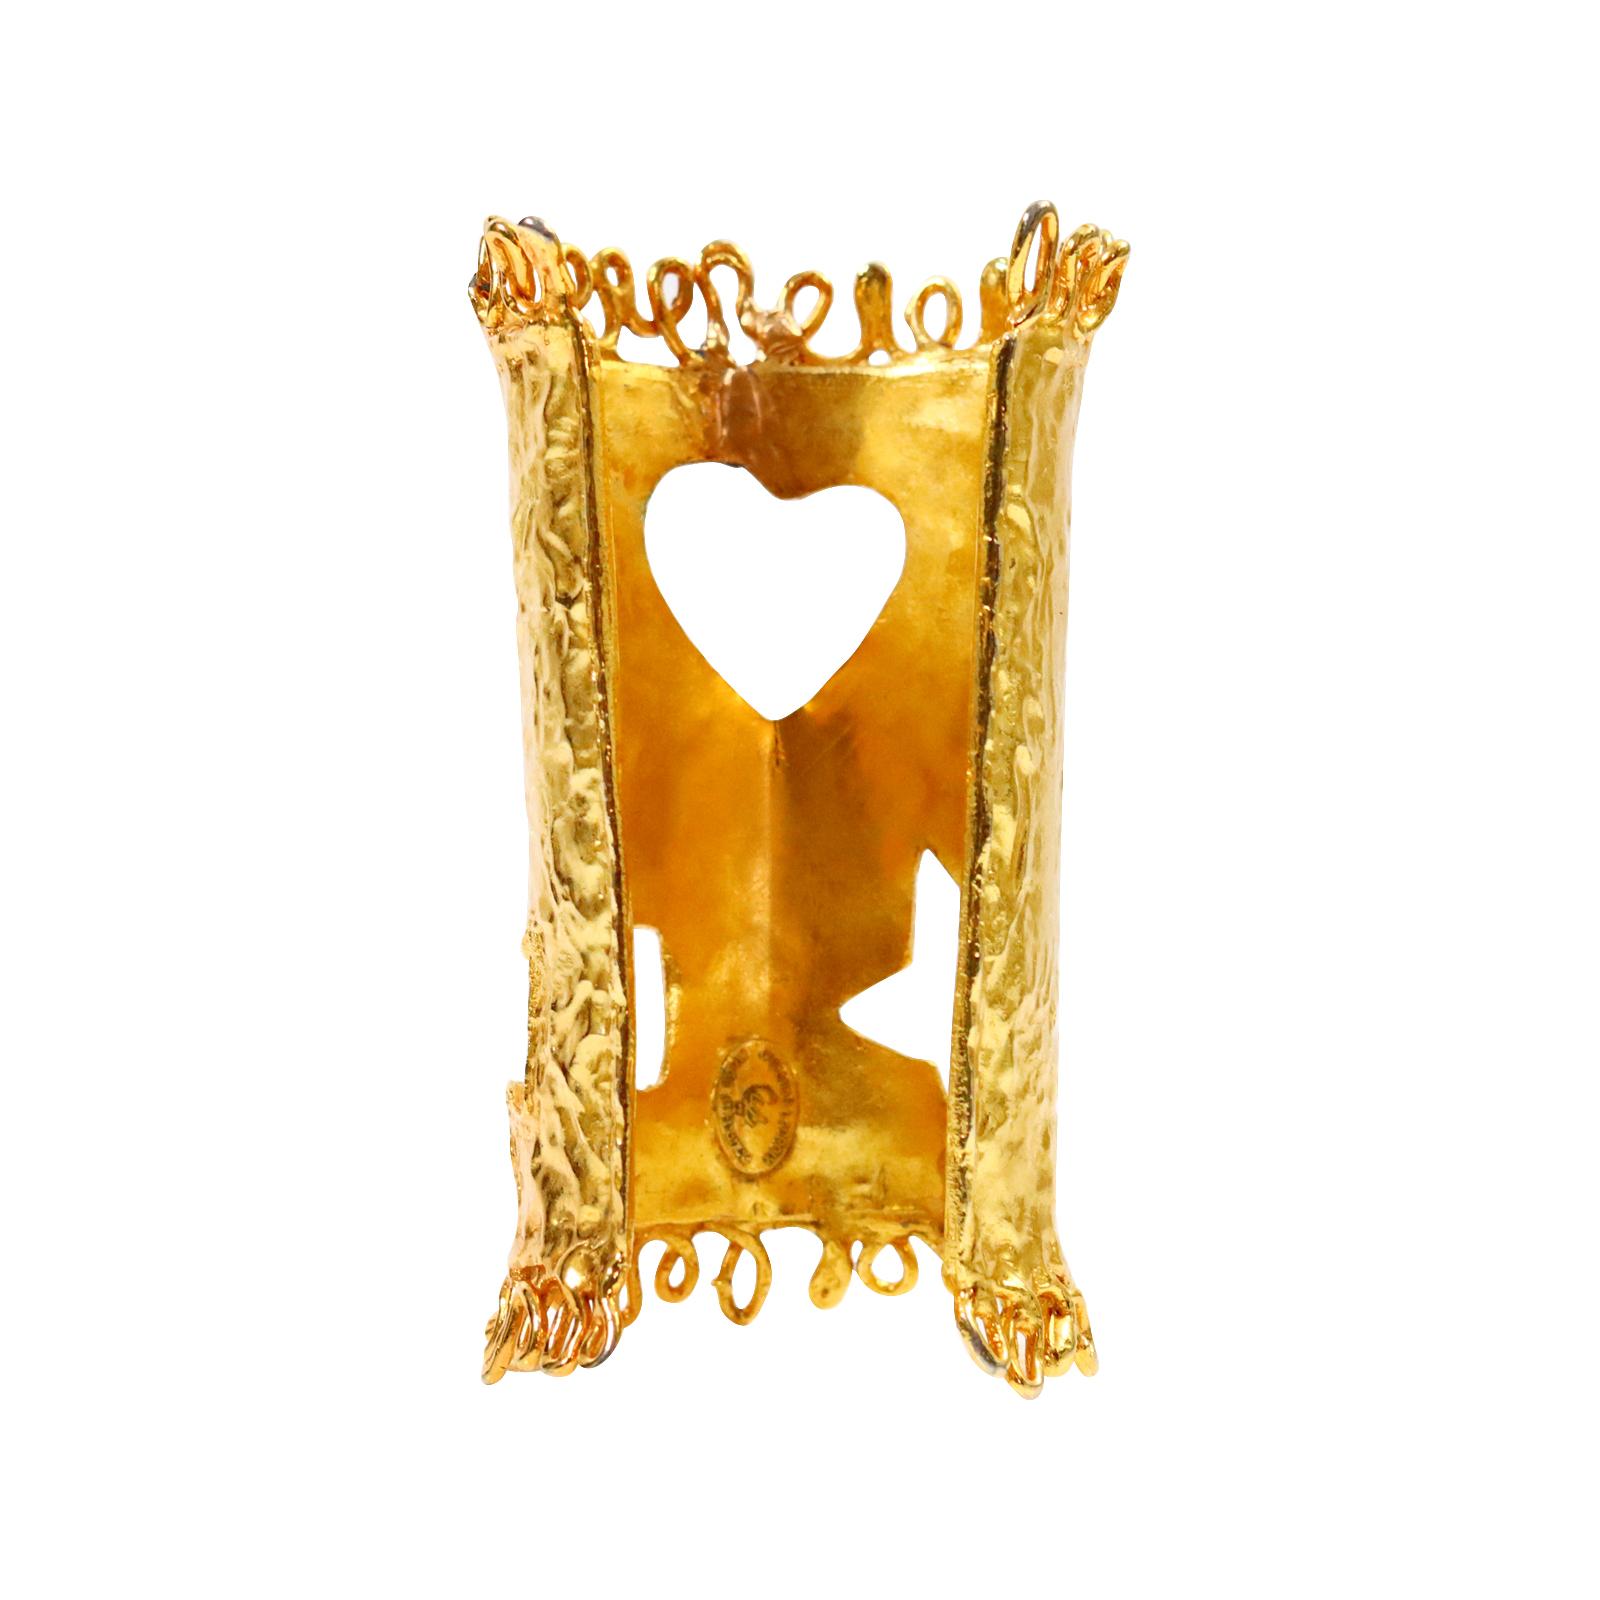 Artist Vintage Christian Lacroix Gold Iconic Cutout Cuff, Circa 1990s For Sale